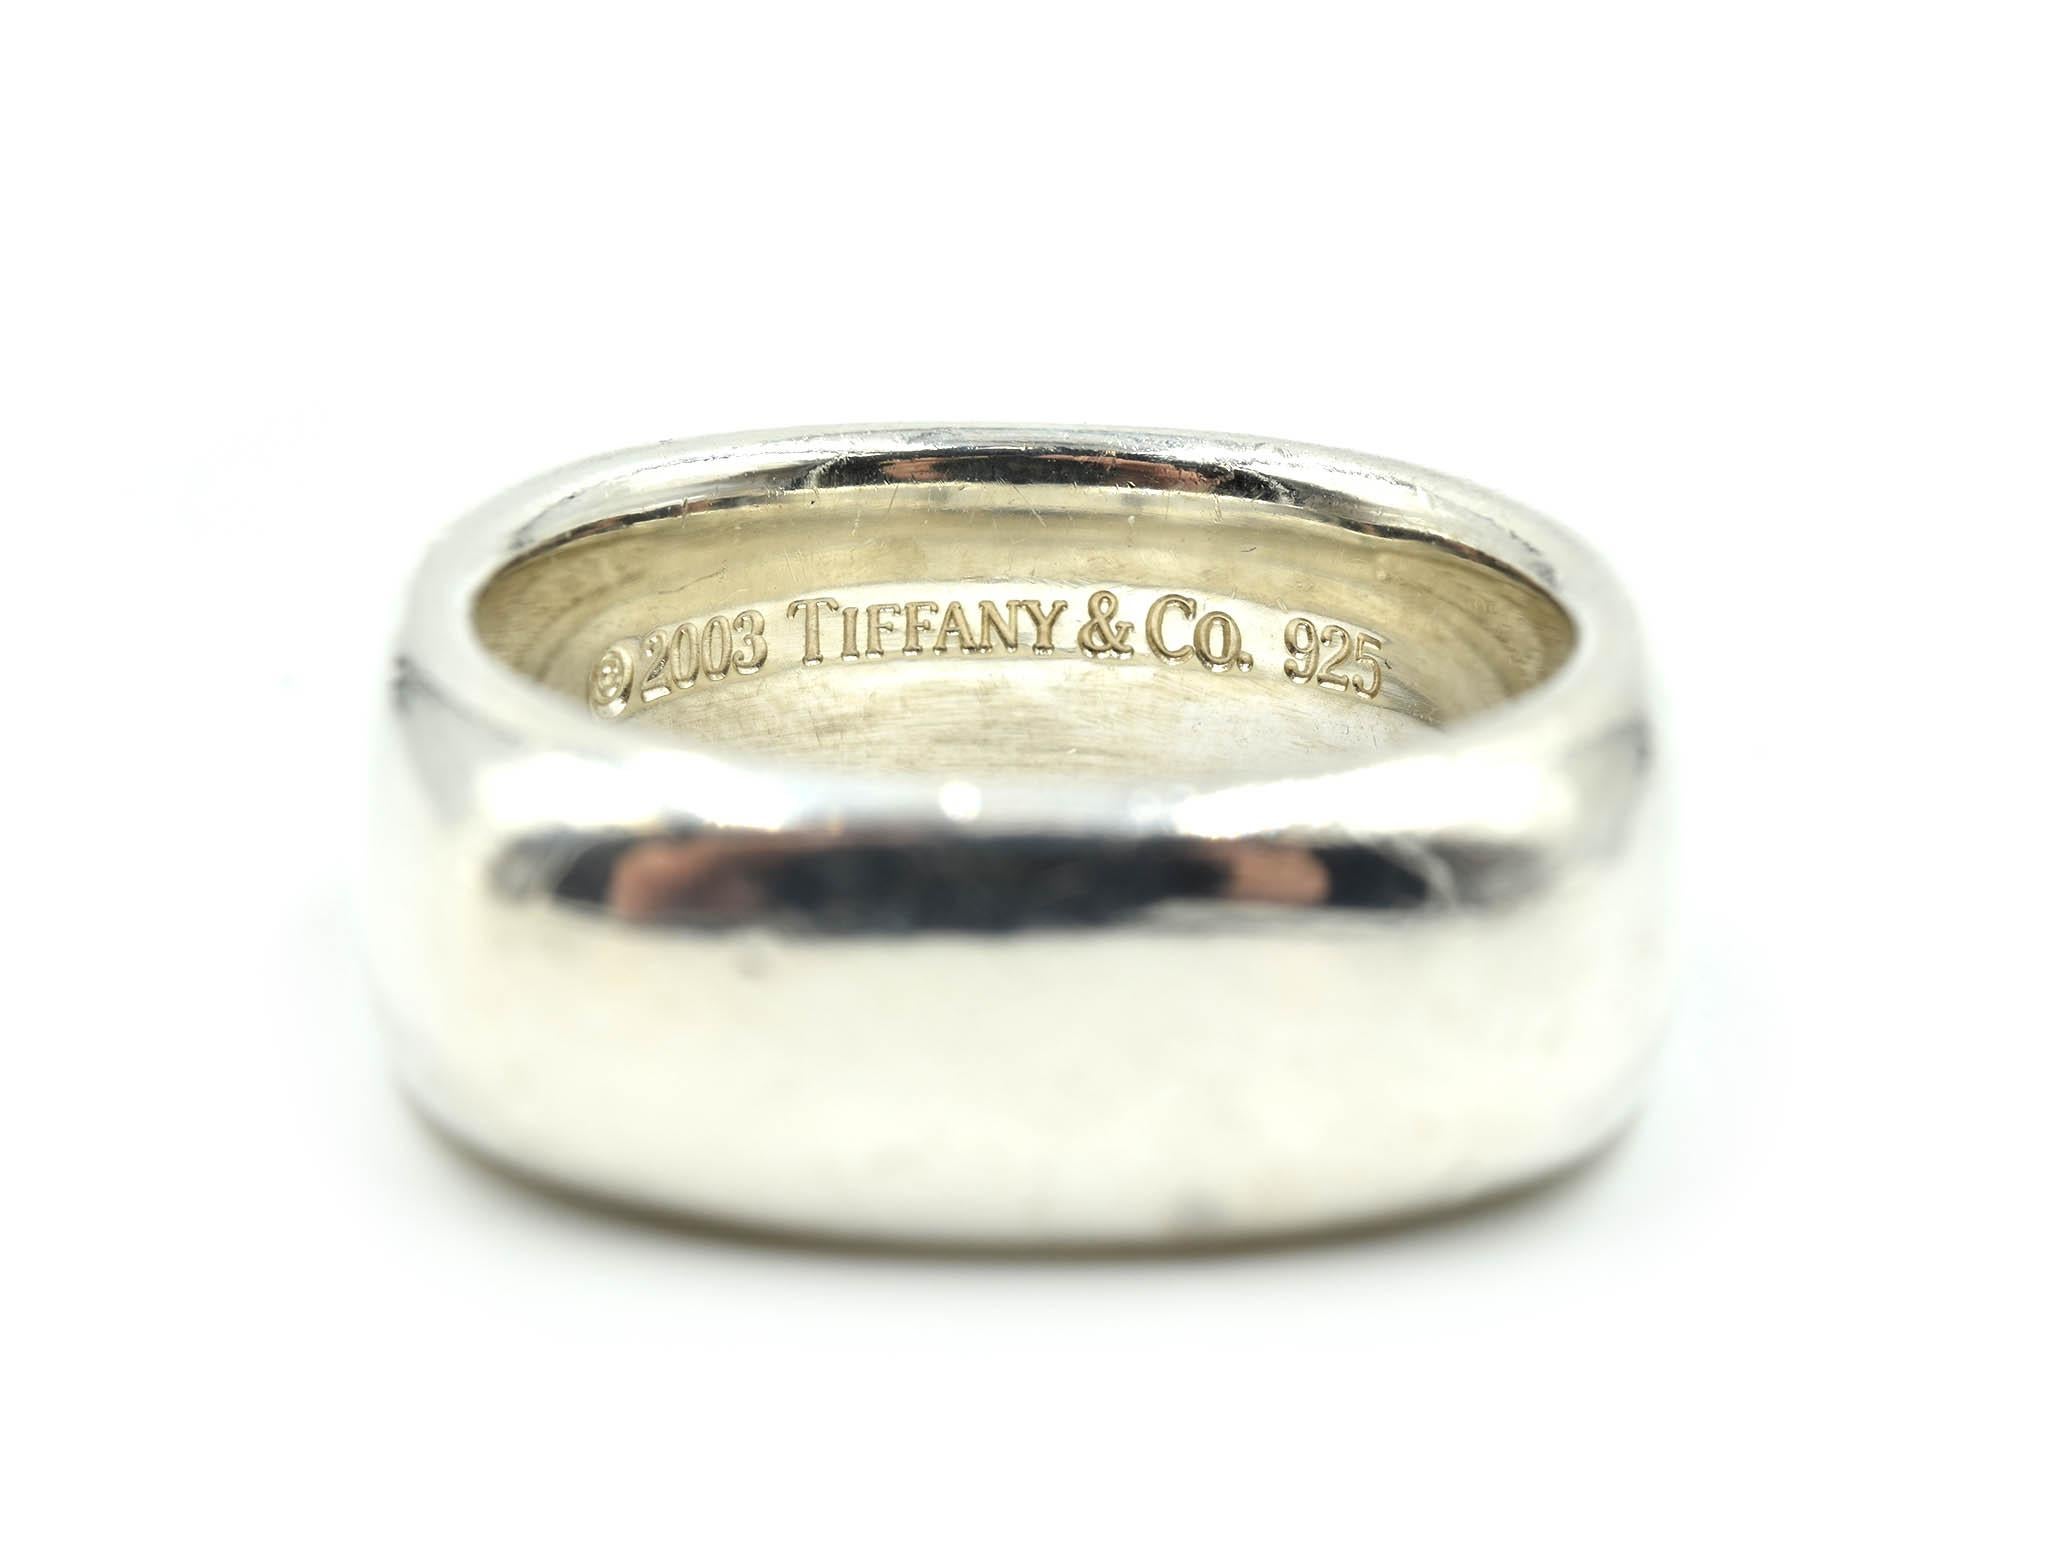 This is a timeless design by a classic designer! Tiffany & Co made this gents wedding ring in high polished sterling silver with a squared band! The band is size 8 1/4; and measures 8.11mm in length and 2.68mm in width at the shank. The wedding band